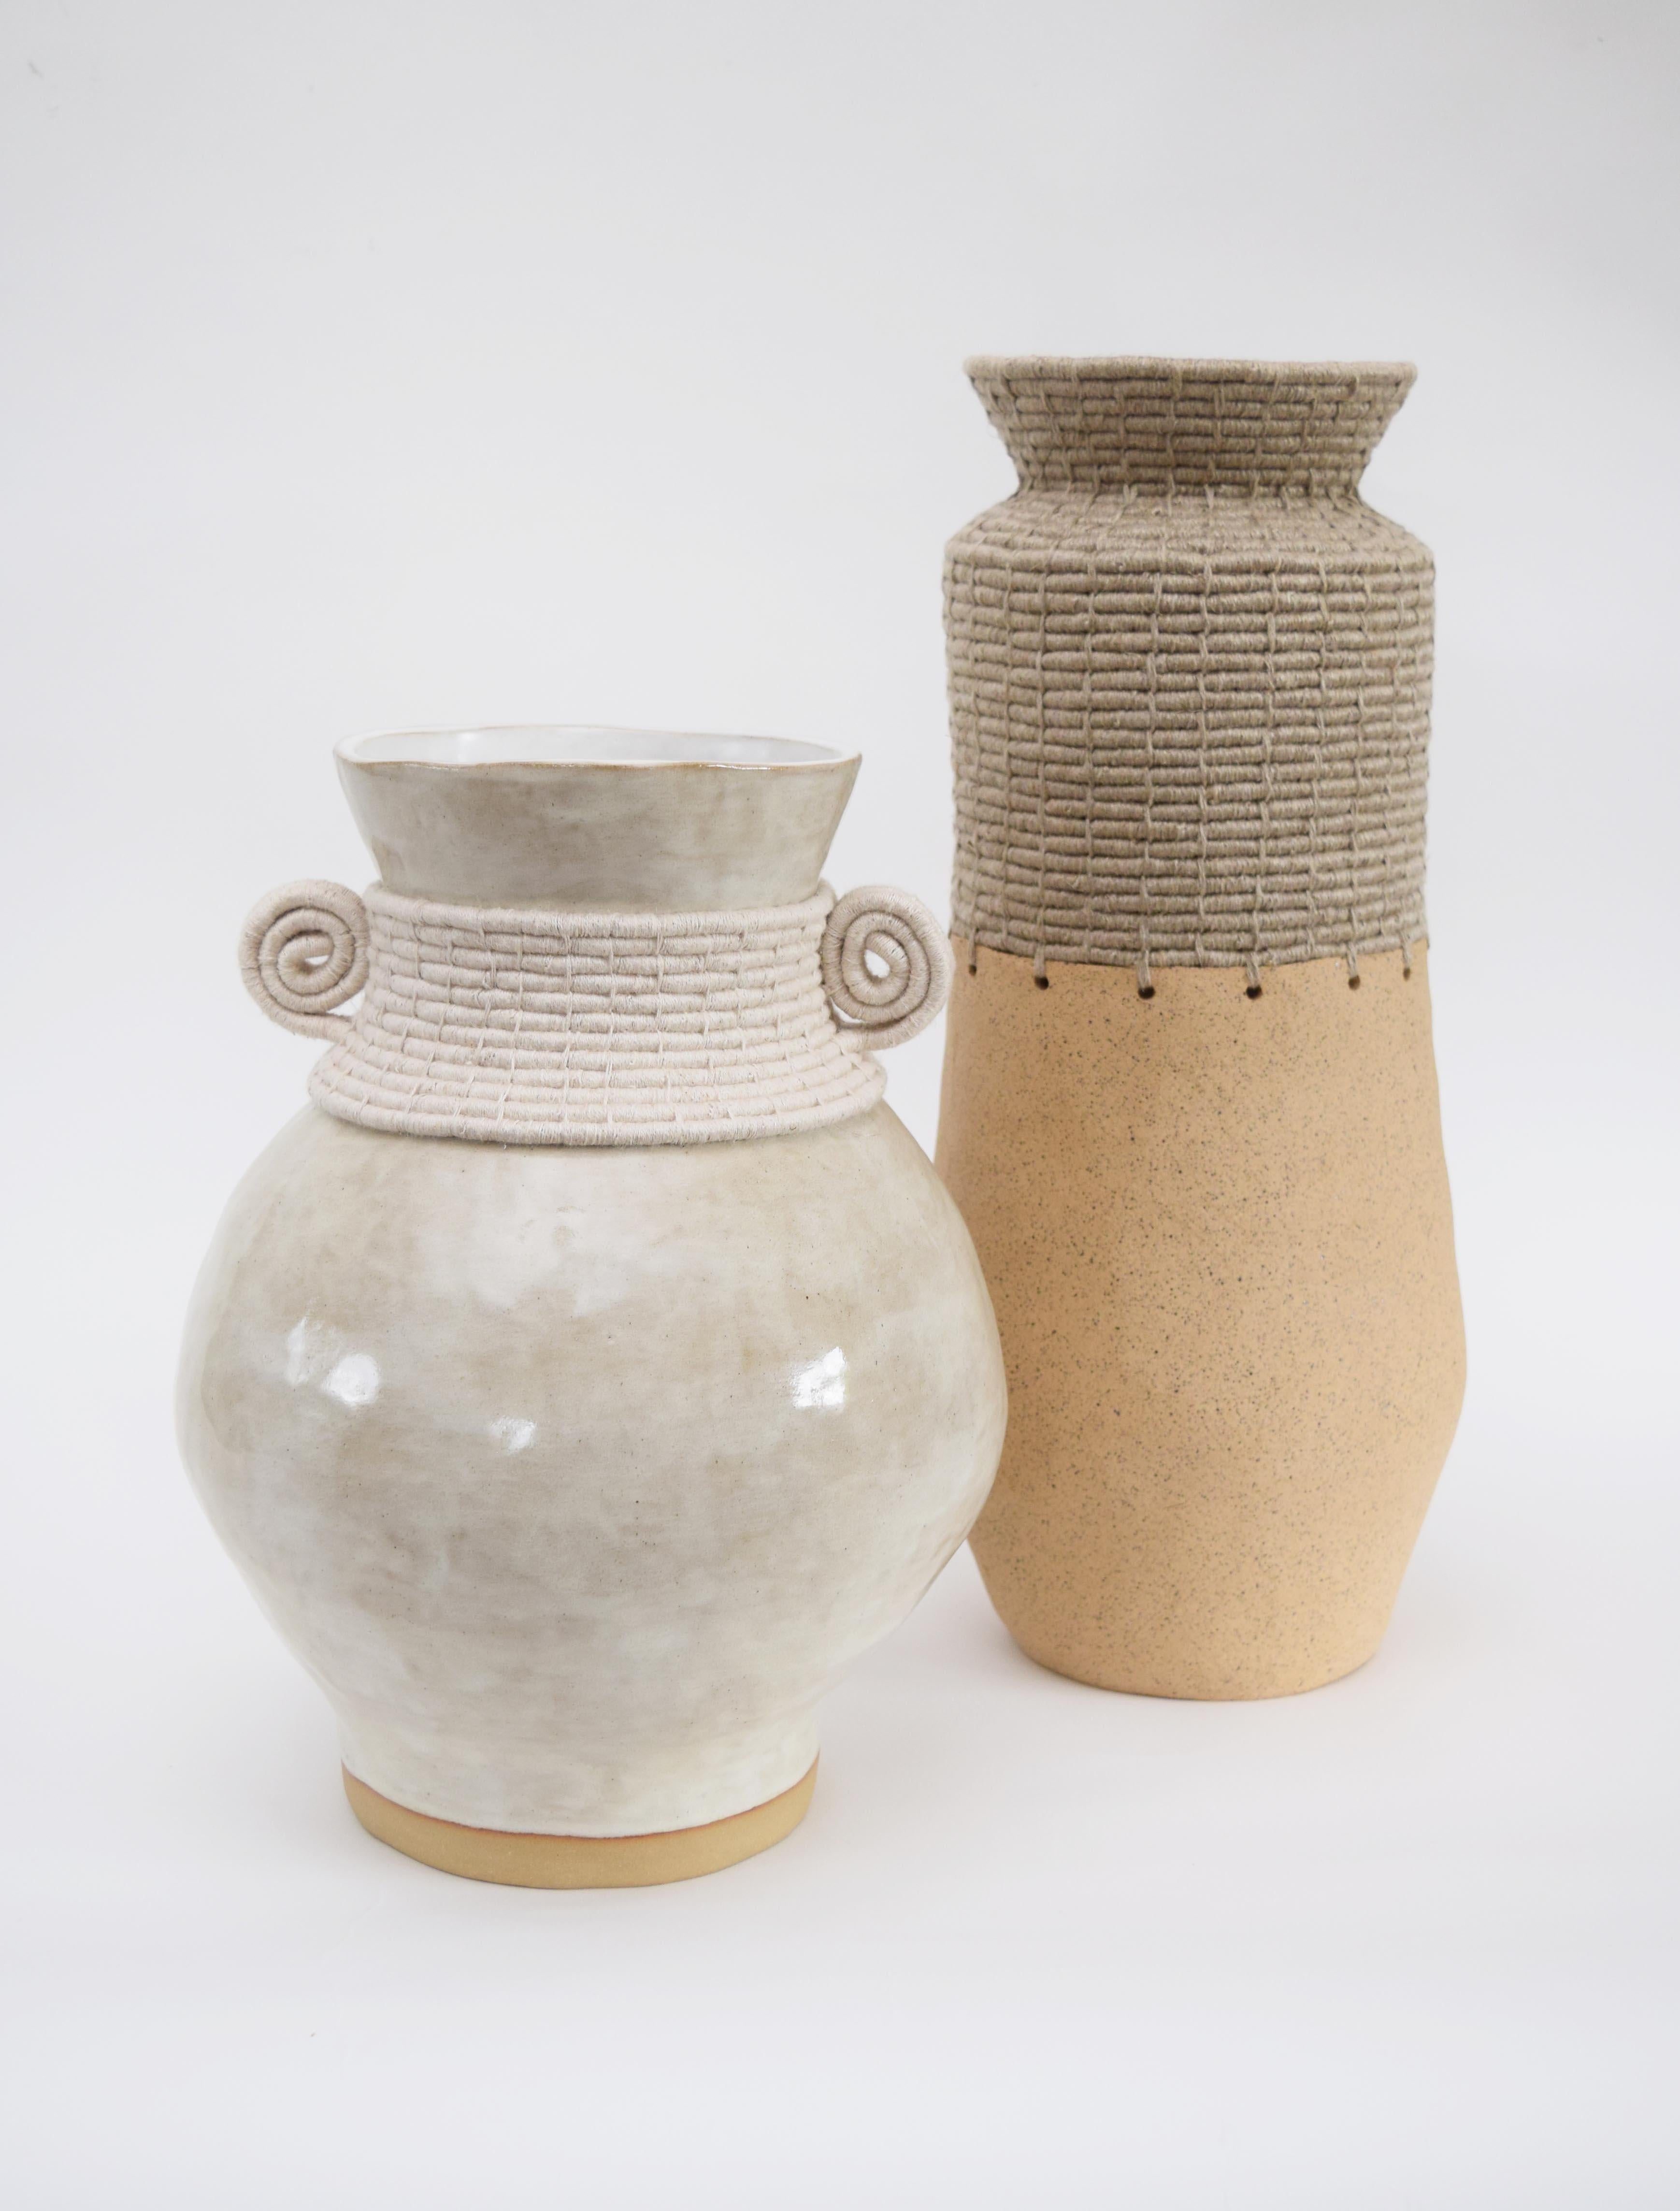 Contemporary One of a Kind Handmade Ceramic Vase #796 - Off White Glaze & Woven Cotton Detail For Sale